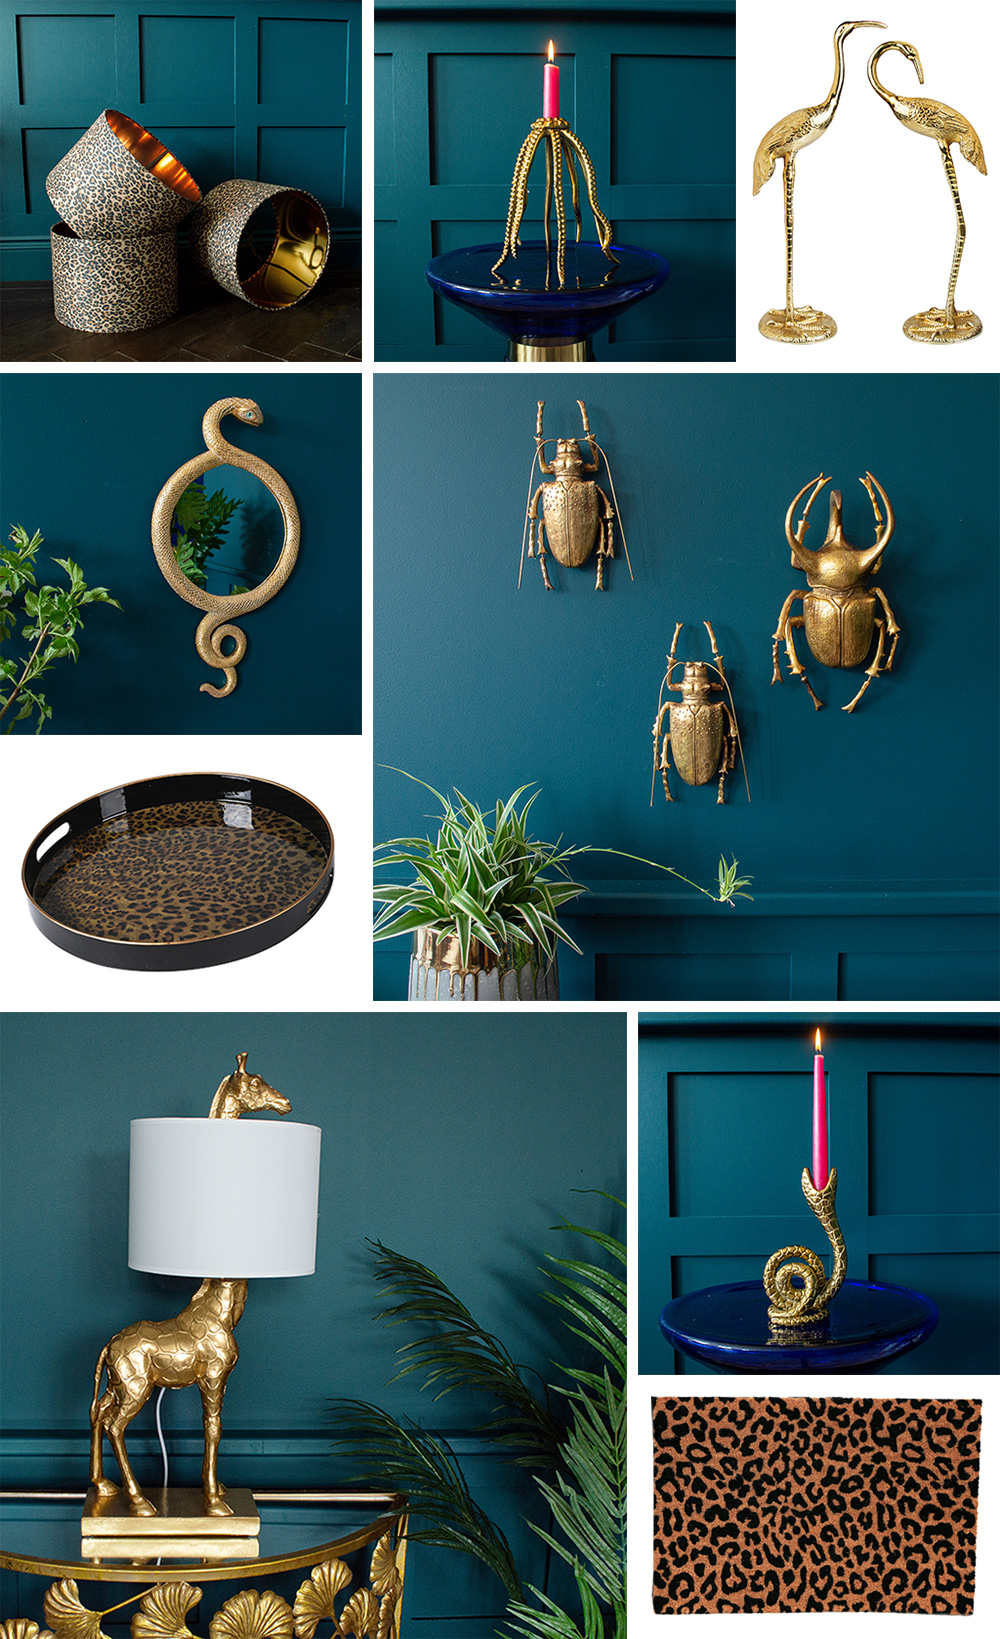 We’re celebrating the natural world in all its glory with our new spring/summer range at Audenza.  All Creatures Great & Small is designed to bedazzle and bewitch in the glory of gold, with shots of colour and texture for glamorous living, with of course, a hefty dose of Audenza quirk.